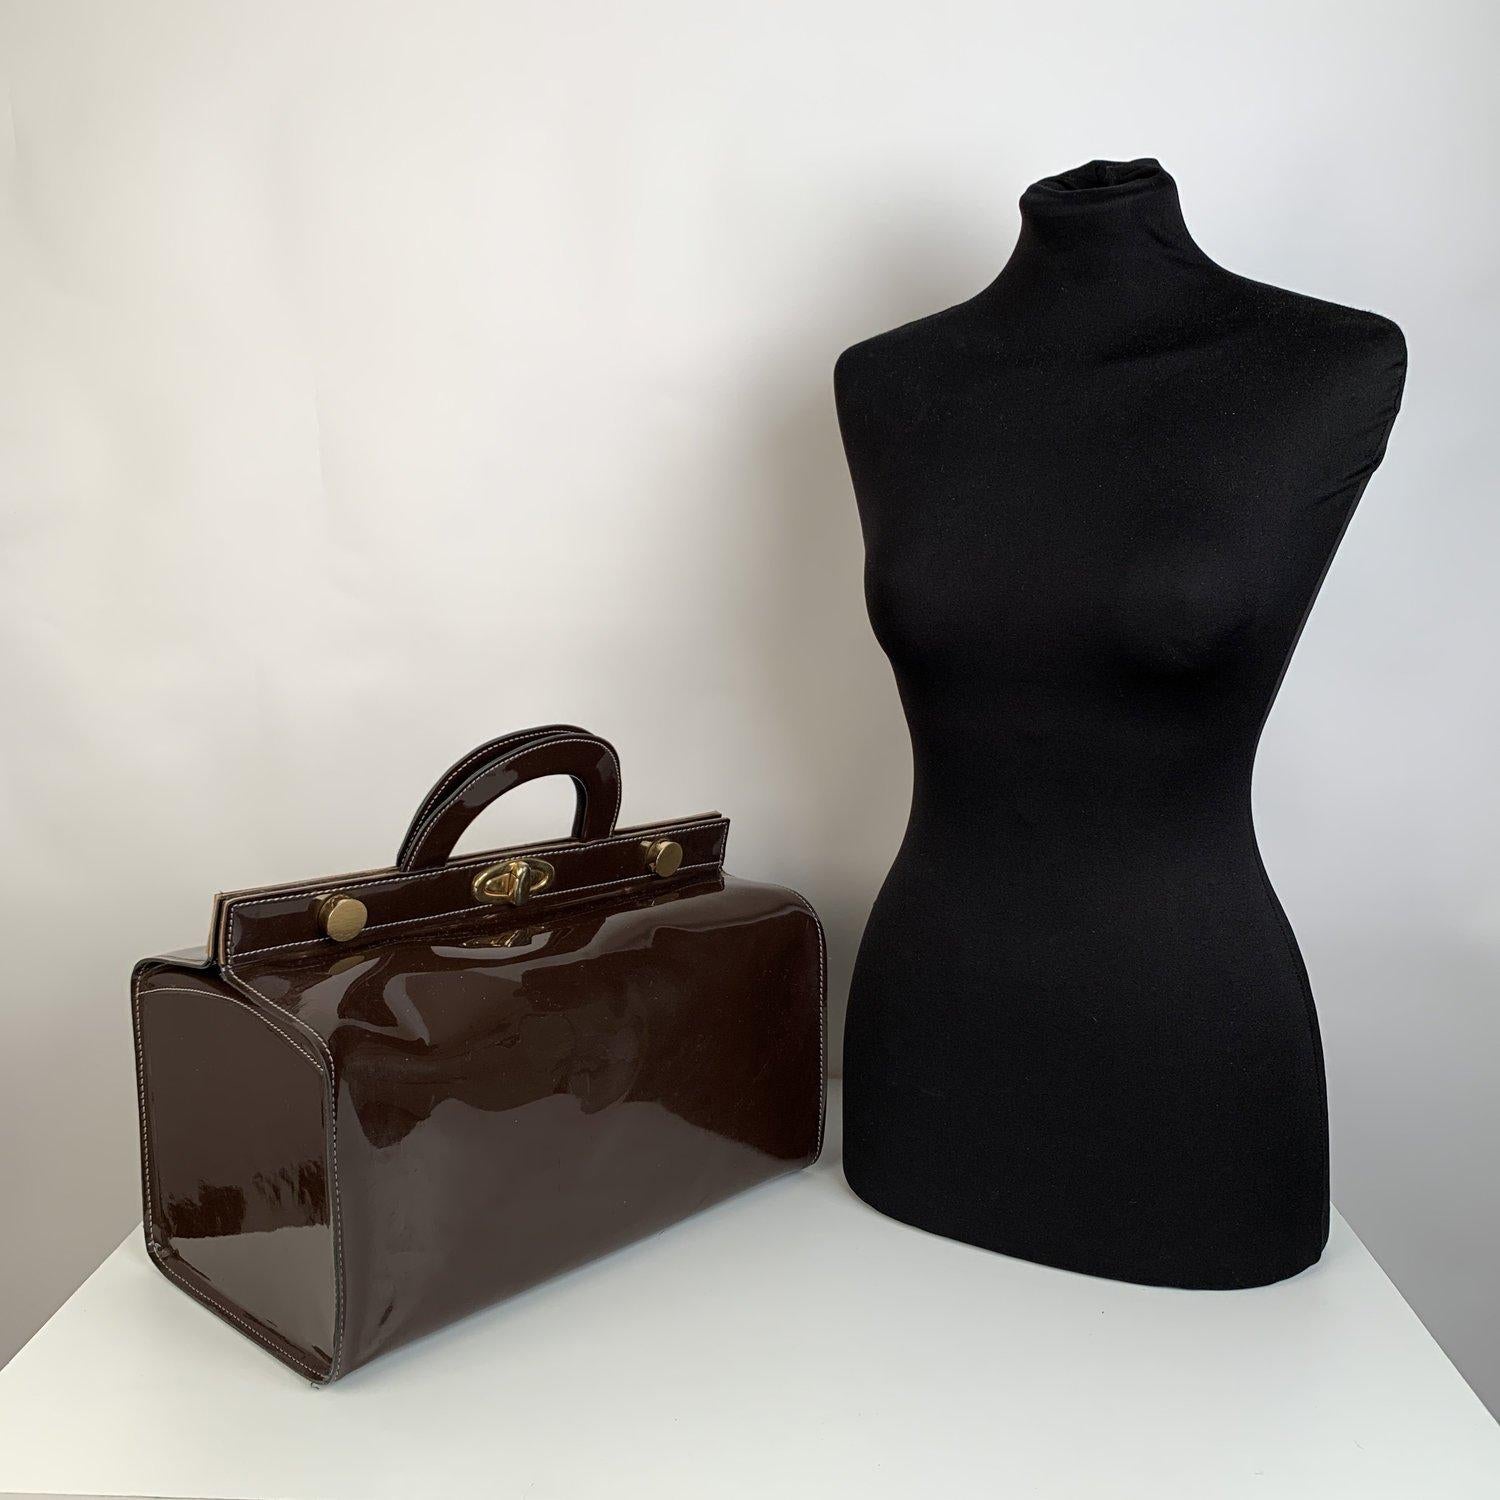 MATERIAL: Leather COLOR: Brown MODEL: Doctor Bag GENDER: Women SIZE: Large Condition B - VERY GOOD Some light wear of use - Some scratches on the outside. Measurements BAG HEIGHT: 8 inches - 20,3 cm BAG LENGTH: 15 inches - 38,1 cm BAG DEPTH: 8.5